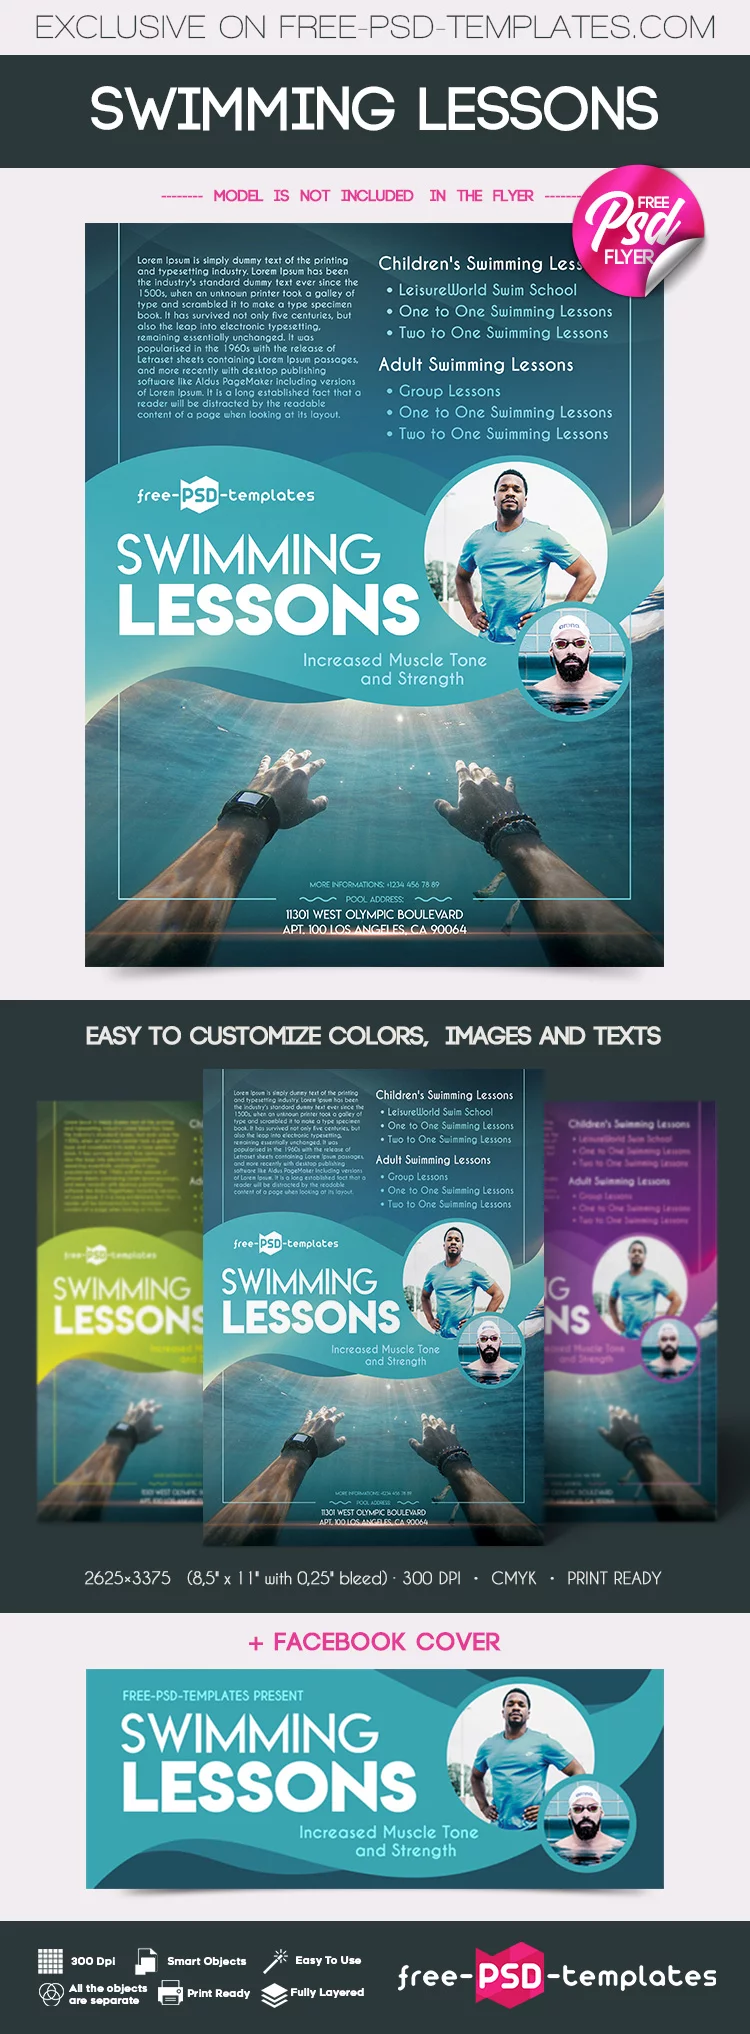 Free Swimming Lessons Flyer in PSD